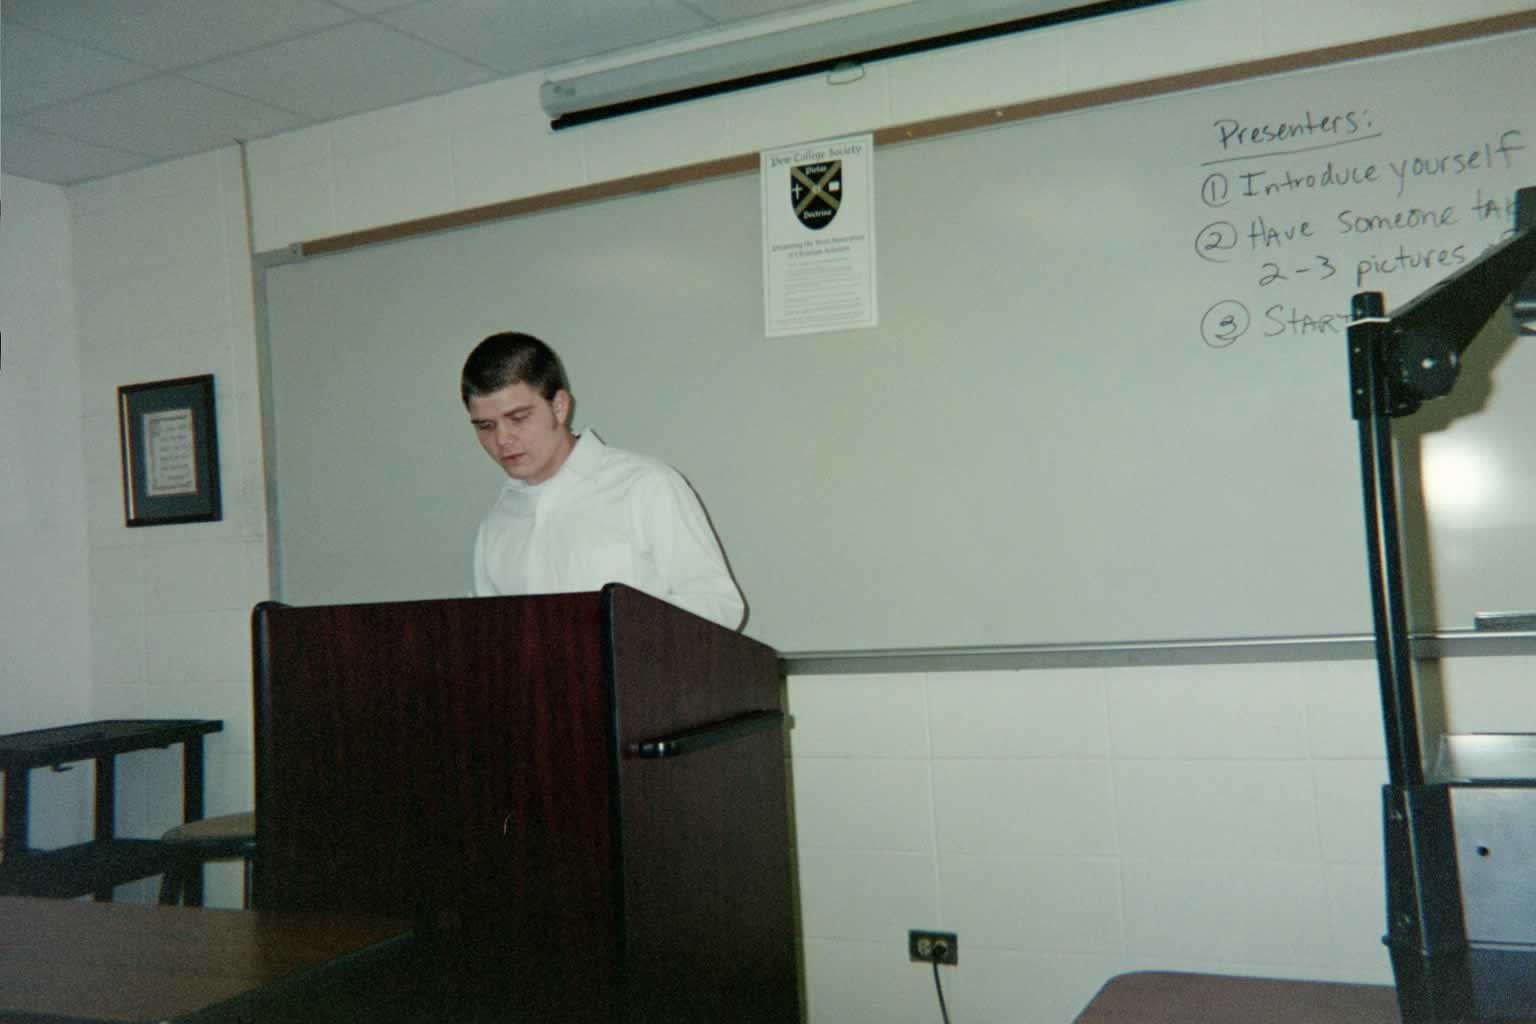 picture of a man in a white shirt standing behind a podium